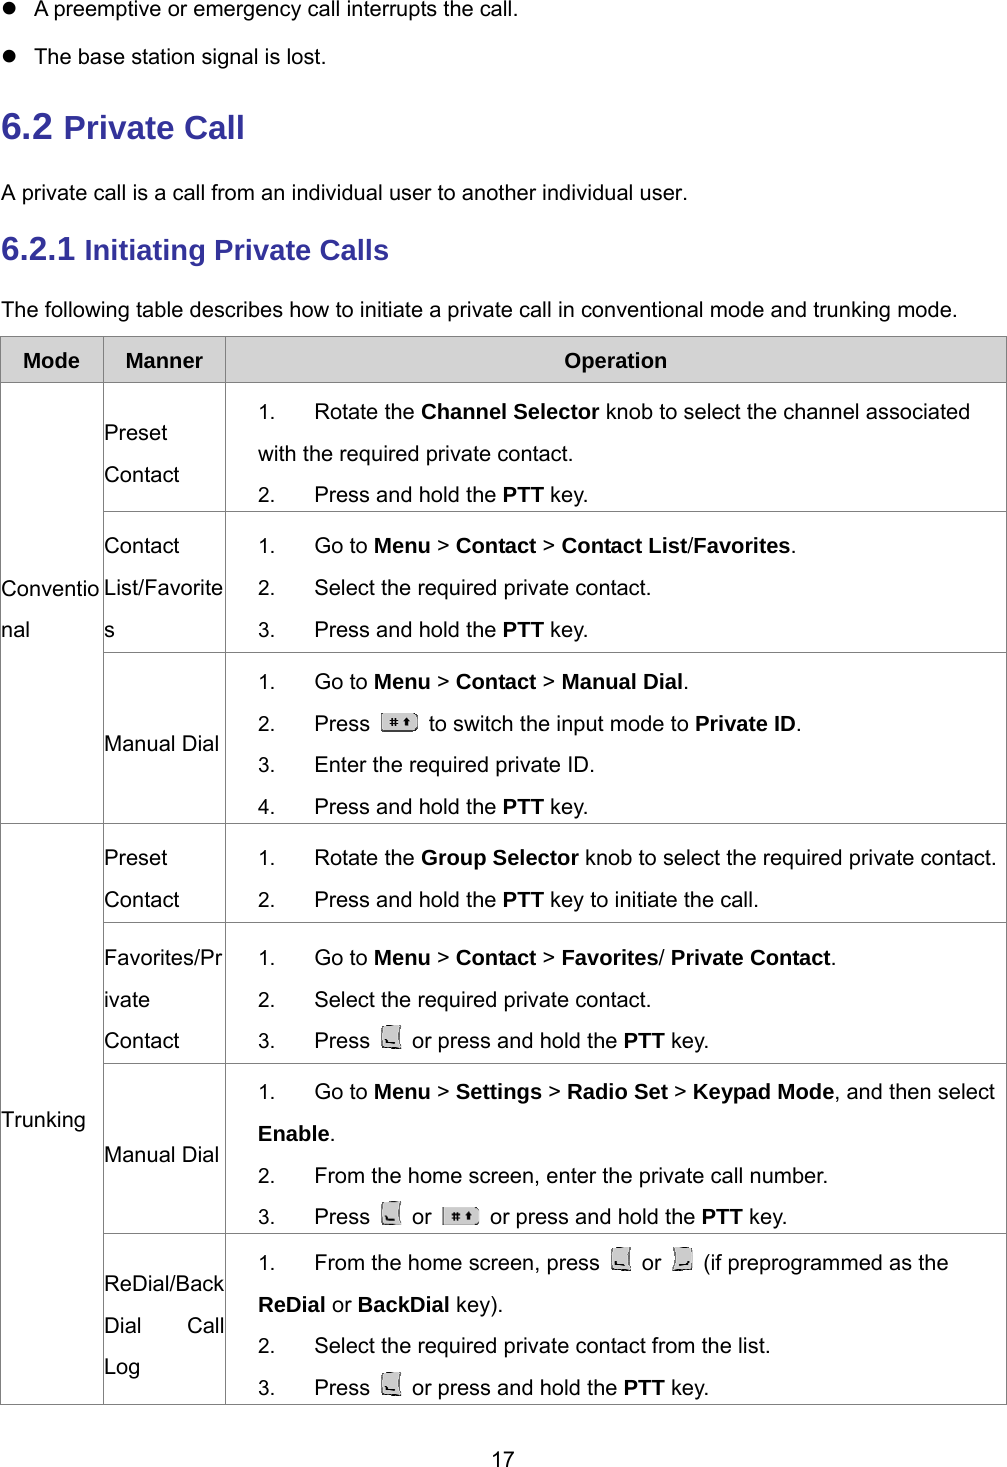  17    A preemptive or emergency call interrupts the call.   The base station signal is lost. 6.2 Private Call A private call is a call from an individual user to another individual user. 6.2.1 Initiating Private Calls The following table describes how to initiate a private call in conventional mode and trunking mode. Mode  Manner  Operation Conventional  Preset Contact 1.  Rotate the Channel Selector knob to select the channel associated with the required private contact. 2.  Press and hold the PTT key. Contact List/Favorites 1.  Go to Menu &gt; Contact &gt; Contact List/Favorites. 2.  Select the required private contact. 3.  Press and hold the PTT key. Manual Dial 1.  Go to Menu &gt; Contact &gt; Manual Dial. 2.  Press    to switch the input mode to Private ID. 3.  Enter the required private ID. 4.  Press and hold the PTT key. Trunking Preset Contact 1.  Rotate the Group Selector knob to select the required private contact.2.  Press and hold the PTT key to initiate the call. Favorites/Private Contact 1.  Go to Menu &gt; Contact &gt; Favorites/ Private Contact. 2.  Select the required private contact. 3.  Press    or press and hold the PTT key. Manual Dial 1.  Go to Menu &gt; Settings &gt; Radio Set &gt; Keypad Mode, and then select Enable. 2.  From the home screen, enter the private call number. 3.  Press   or    or press and hold the PTT key. ReDial/BackDial Call Log 1.  From the home screen, press   or    (if preprogrammed as the ReDial or BackDial key). 2.  Select the required private contact from the list. 3.  Press    or press and hold the PTT key. 